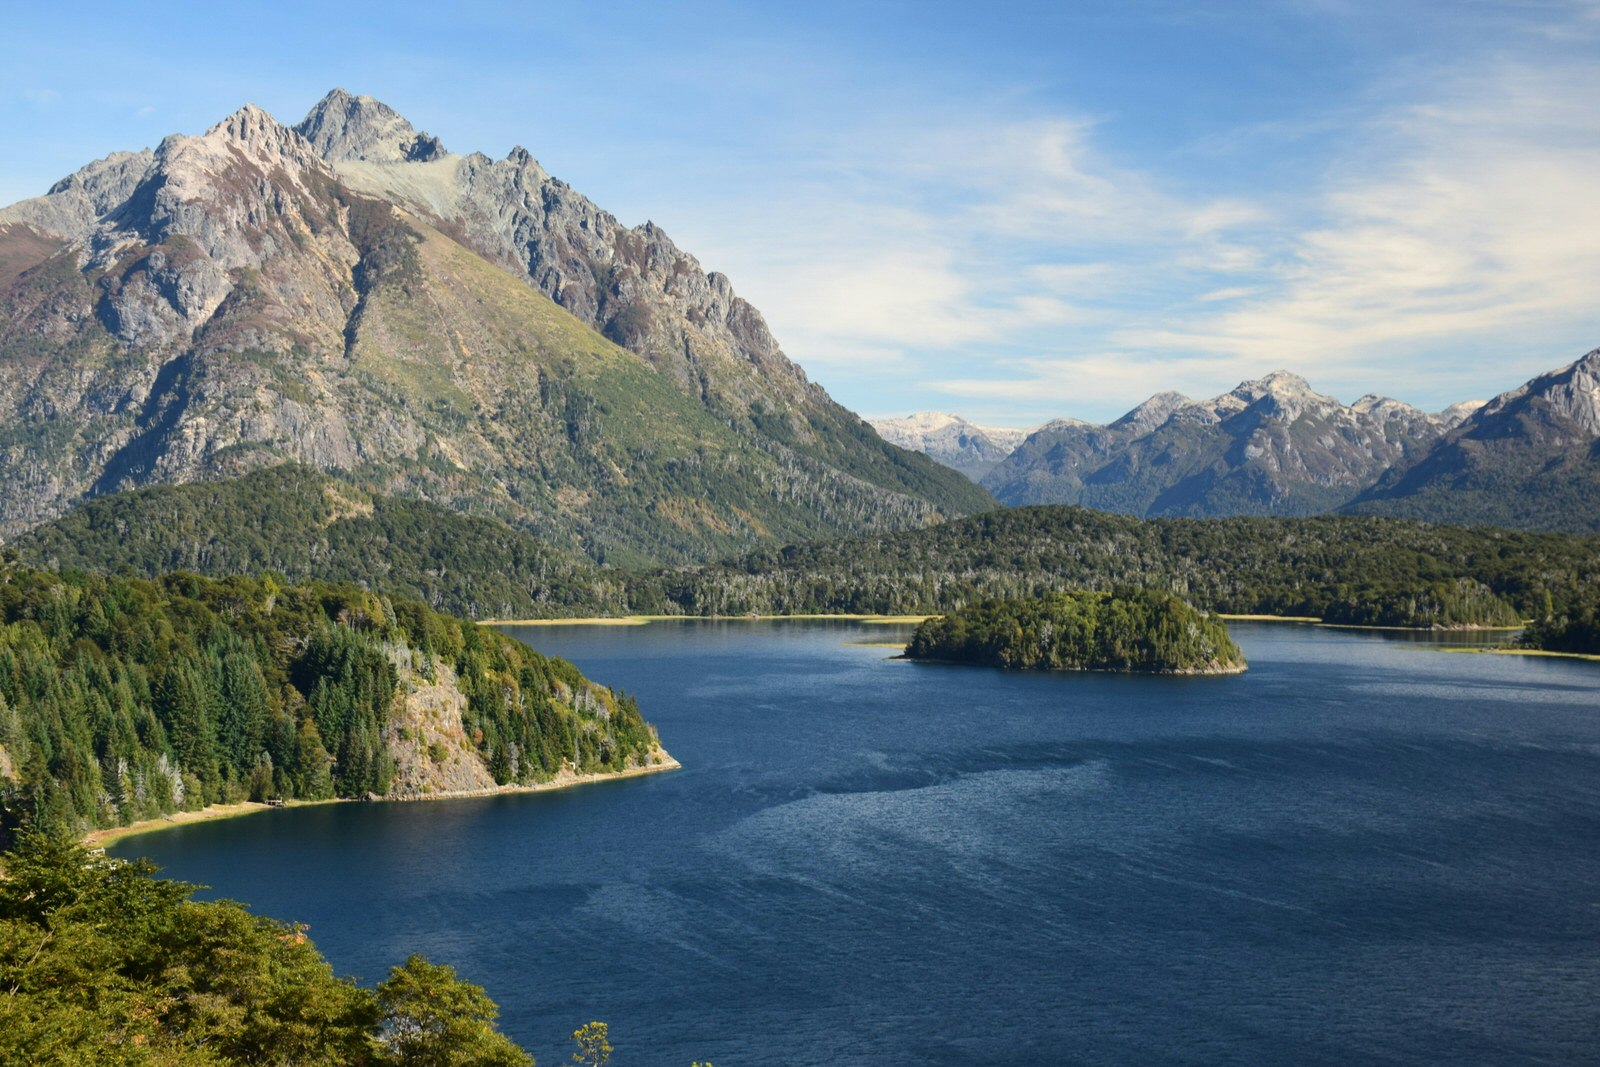 Rounded, treeless summits tower above the forests and lakes within Parque Nacional Nahuel Huapi.